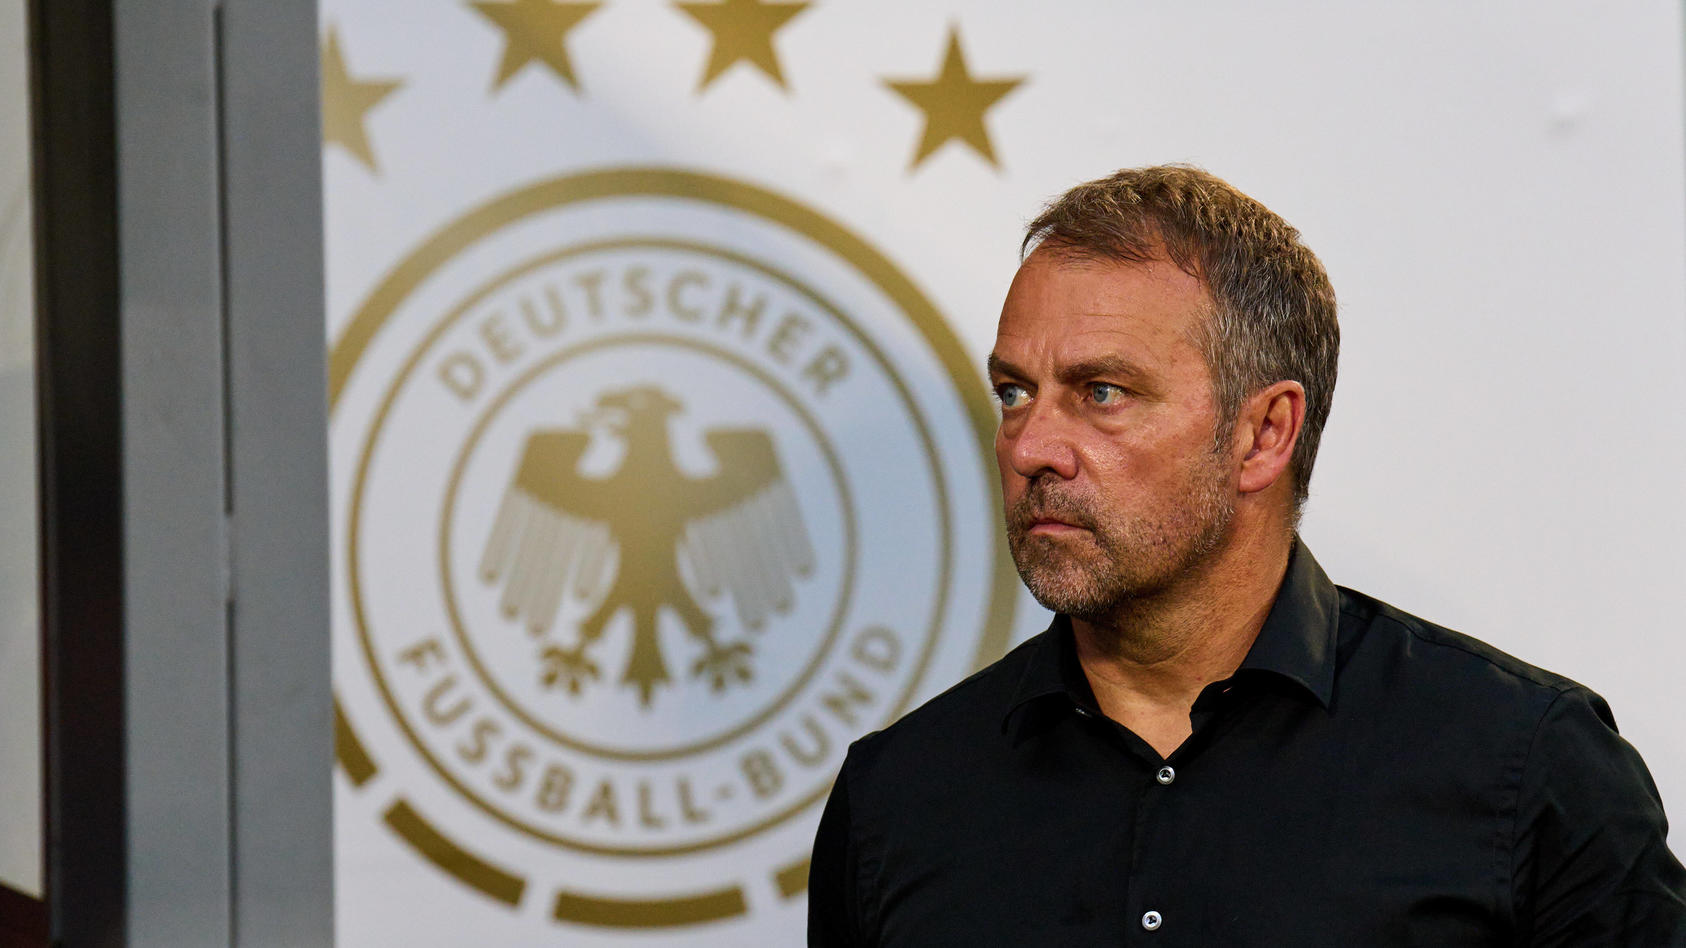  DFB headcoach Hans-Dieter Hansi Flick , Bundestrainer, Nationaltrainer, in the UEFA Nations League 2022 match ITALY - GERMANY in Season 2022/2023 on Juni 04, 2022 in Bologna, Italy.